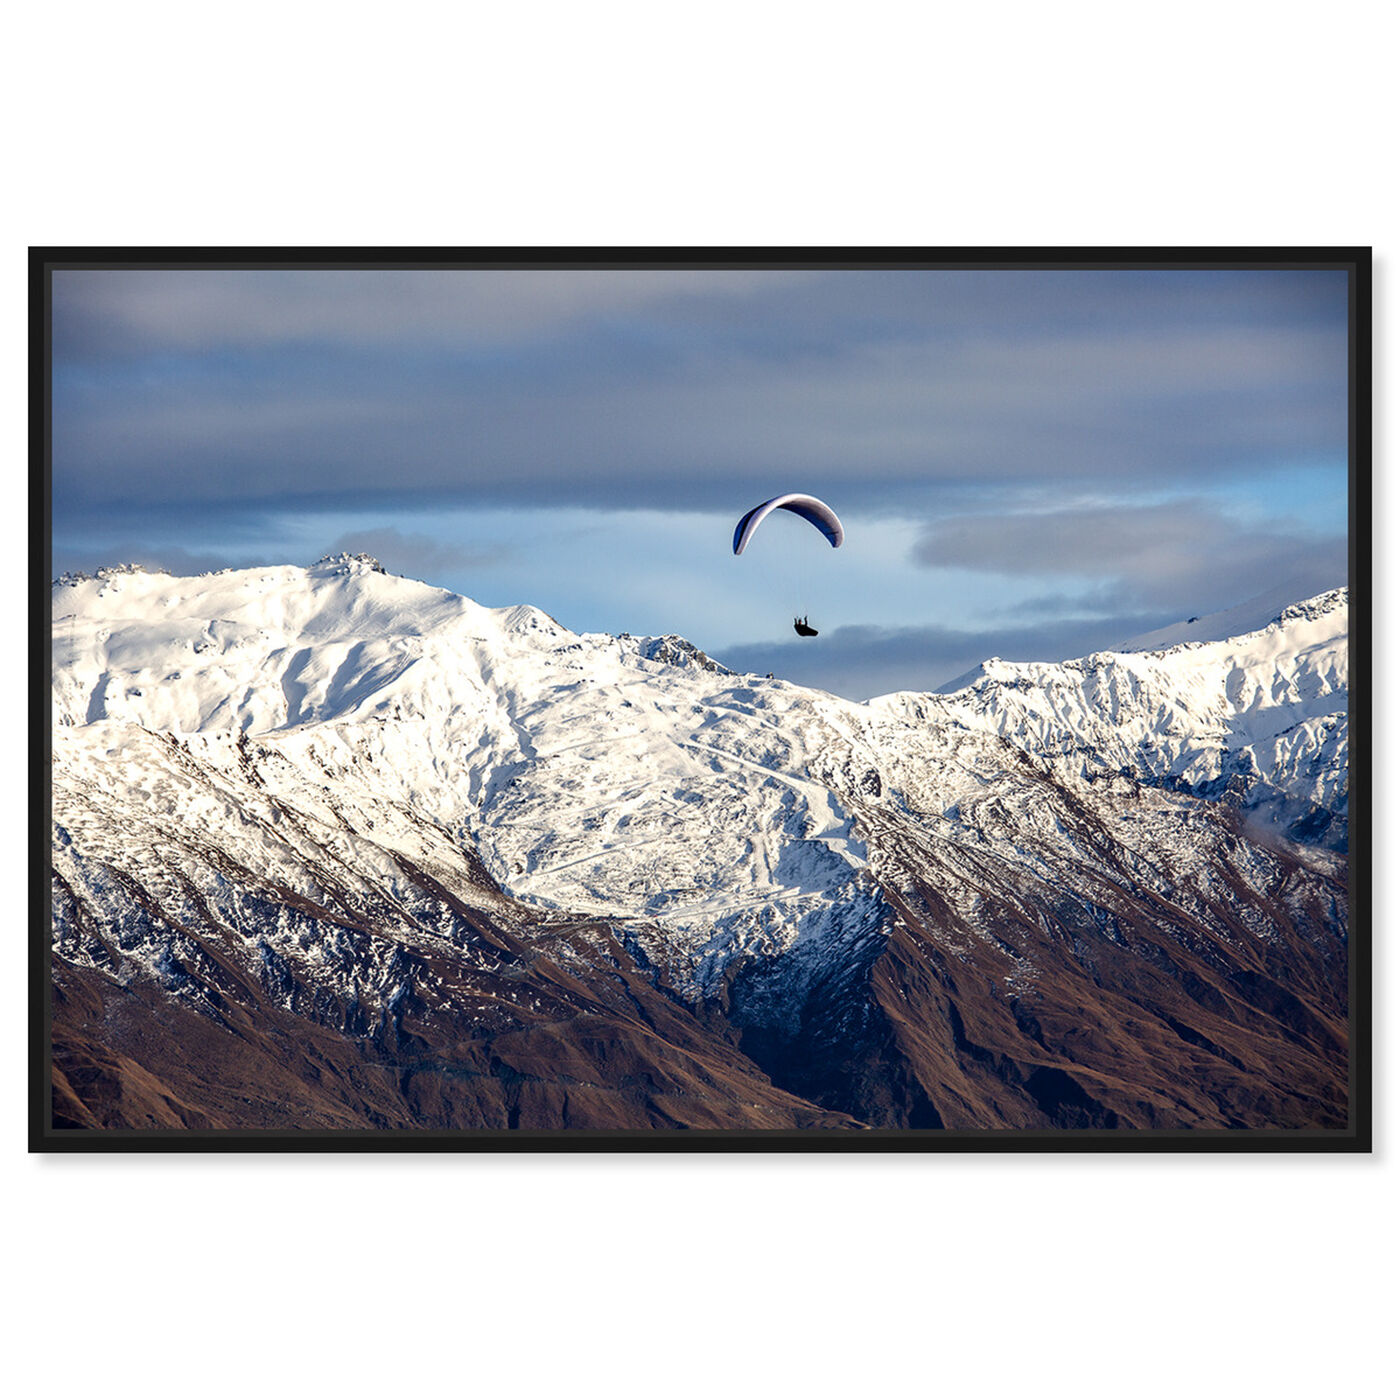 Front view of Curro Cardenal - Paragliding Free featuring nature and landscape and mountains art.